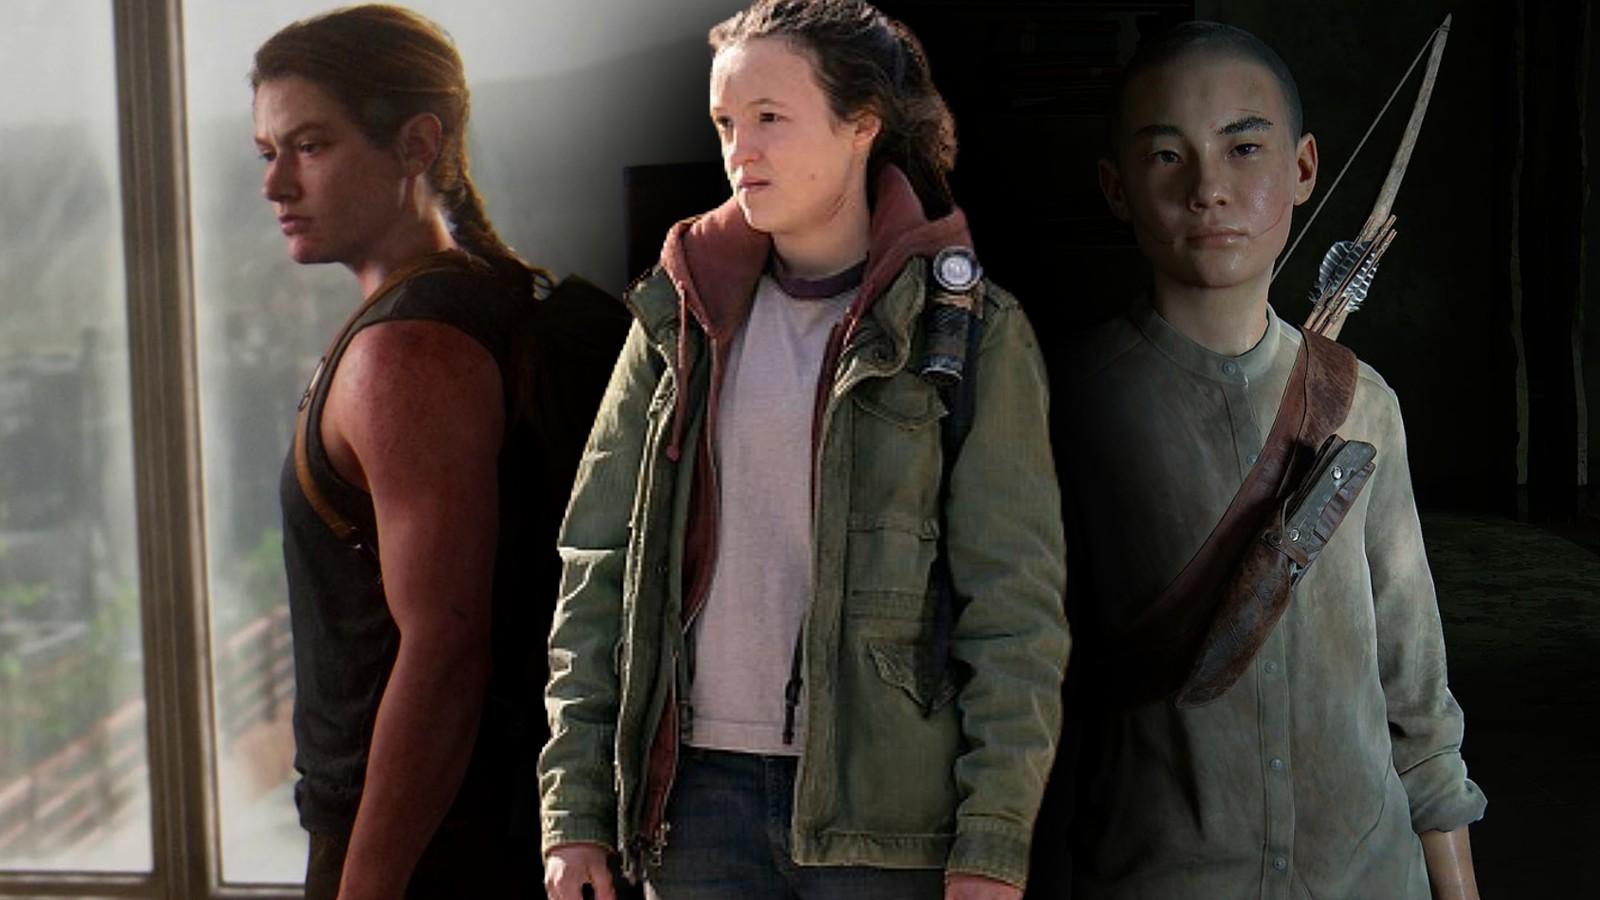 Bella Ramsey in The Last of Us HBO show and Abby and Lev from Part 2